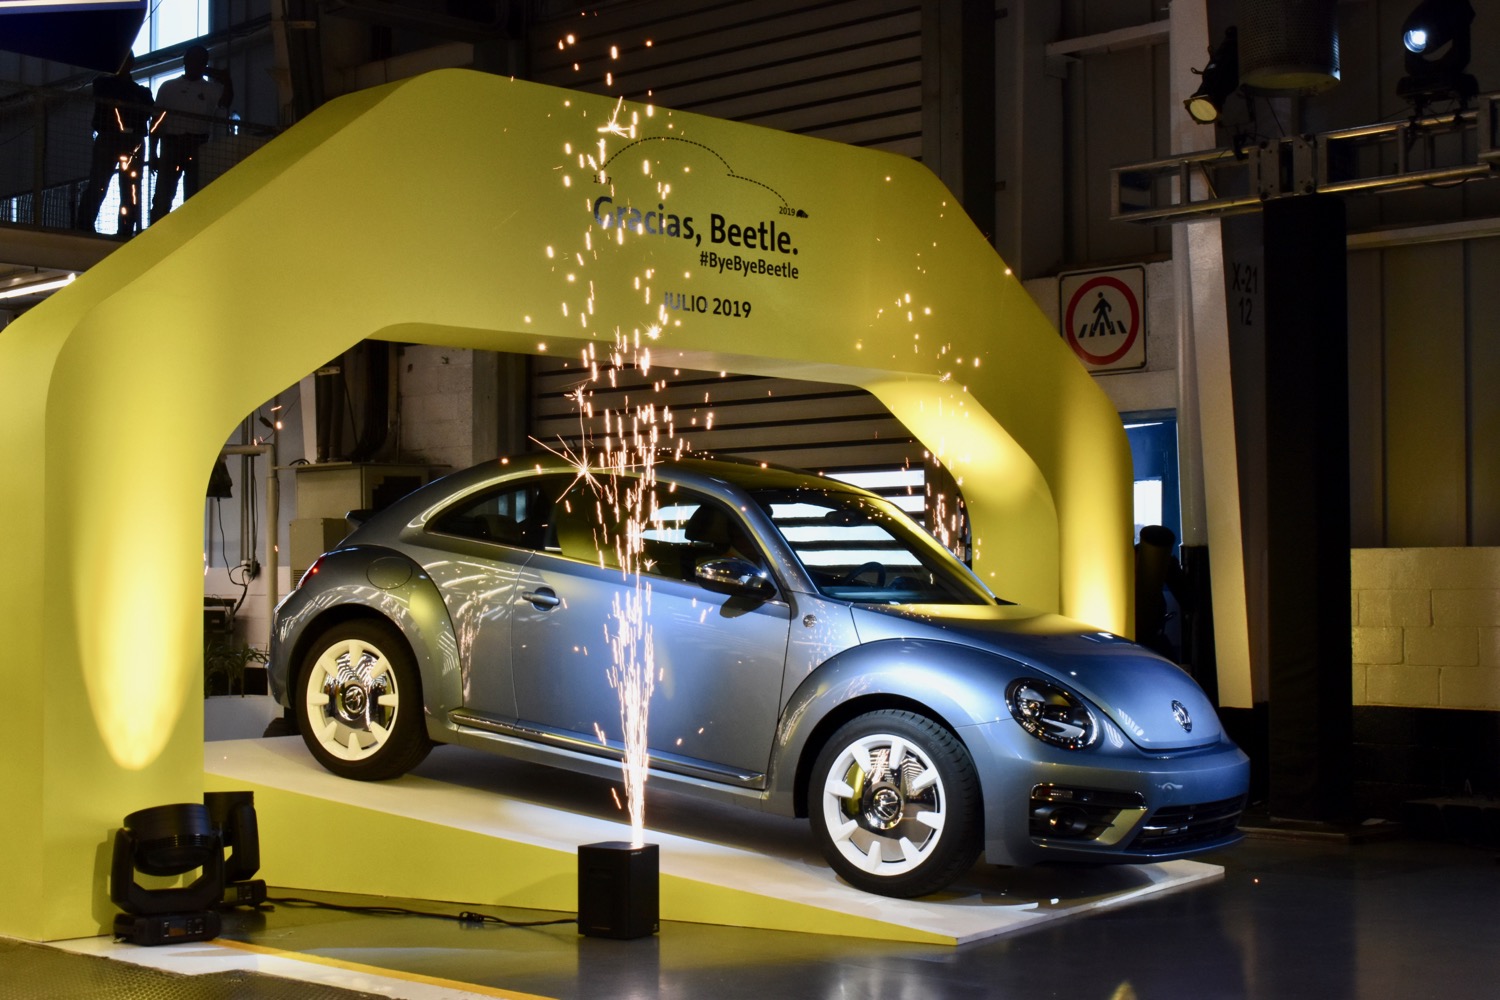 The Last Volkswagen Beetle Rolls Off the Assembly Line